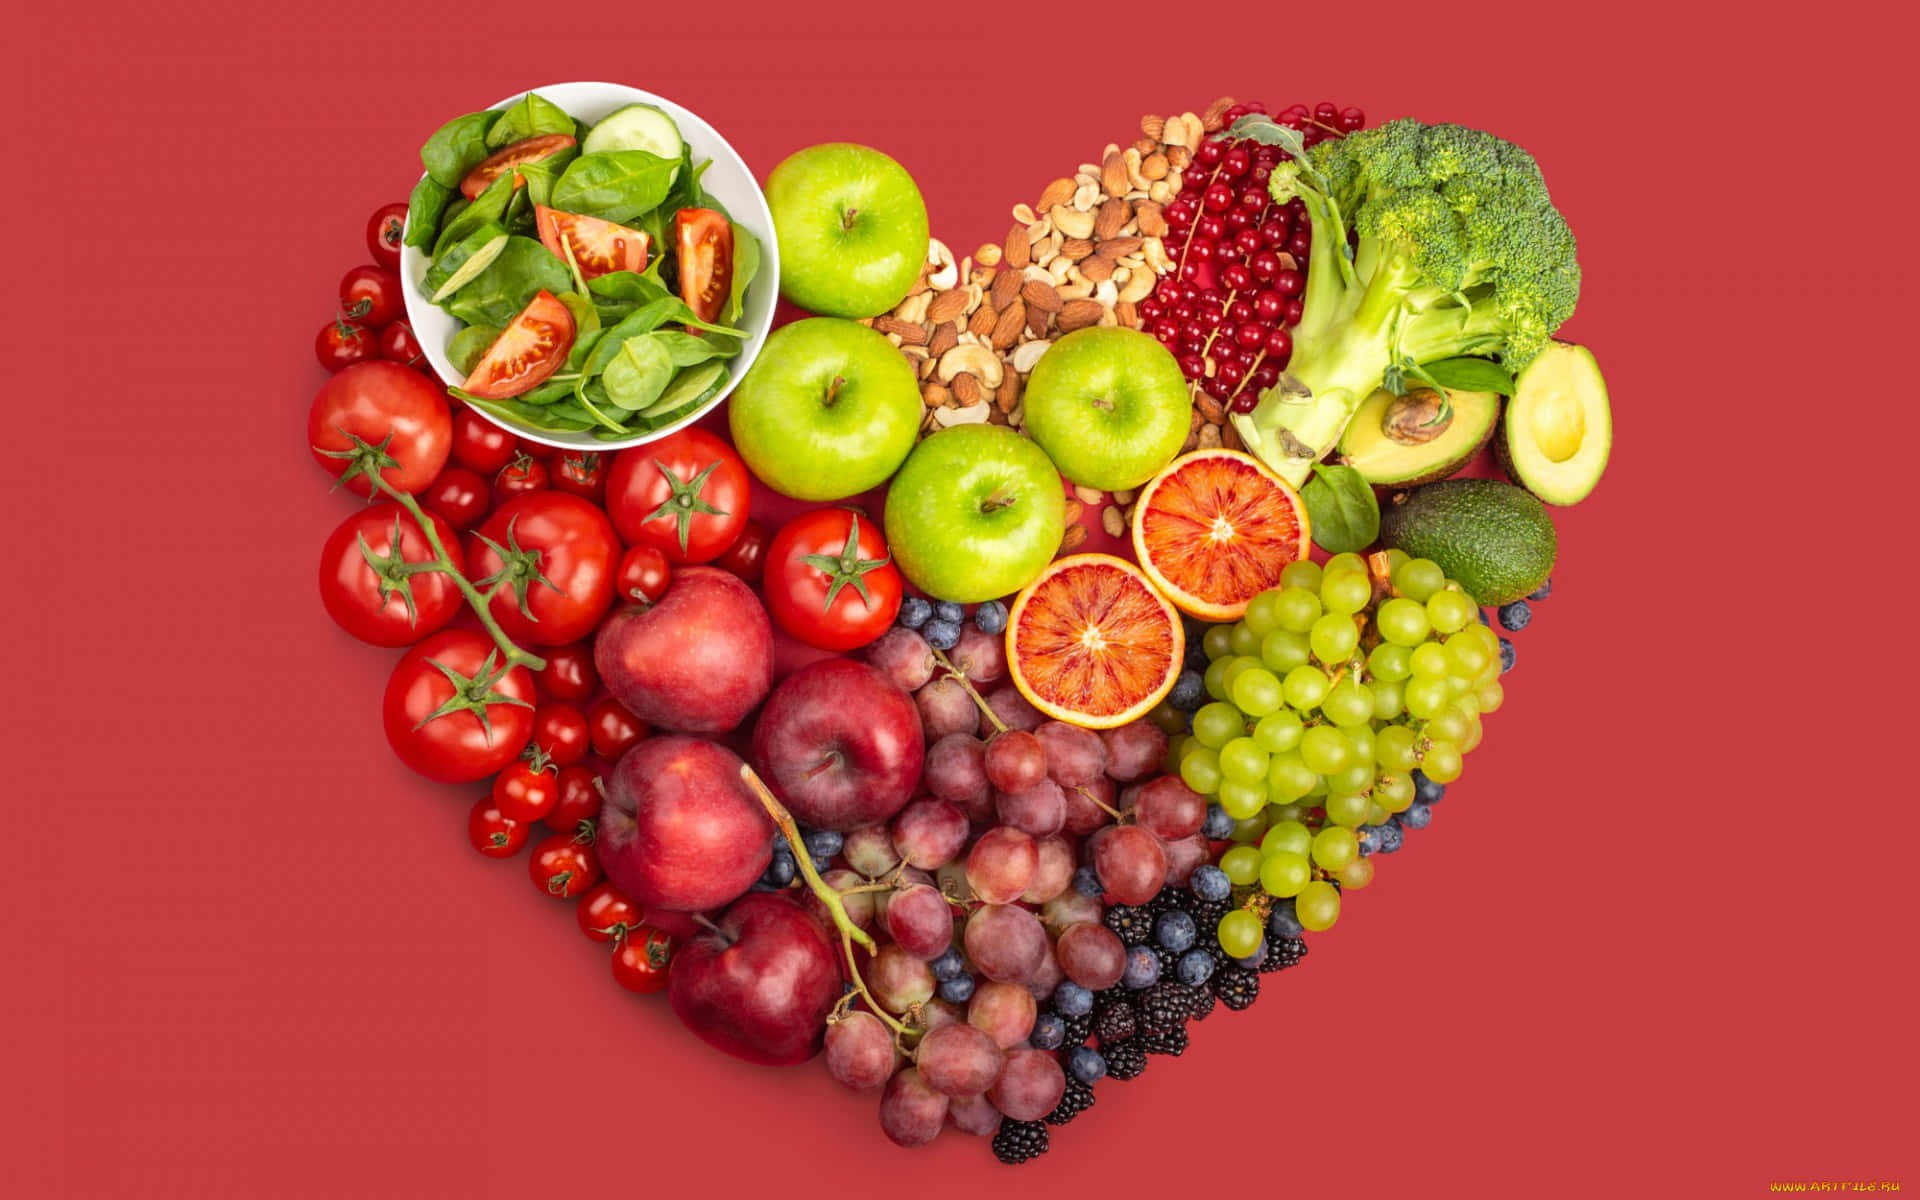 Heart Shaped Fruit And Vegetables